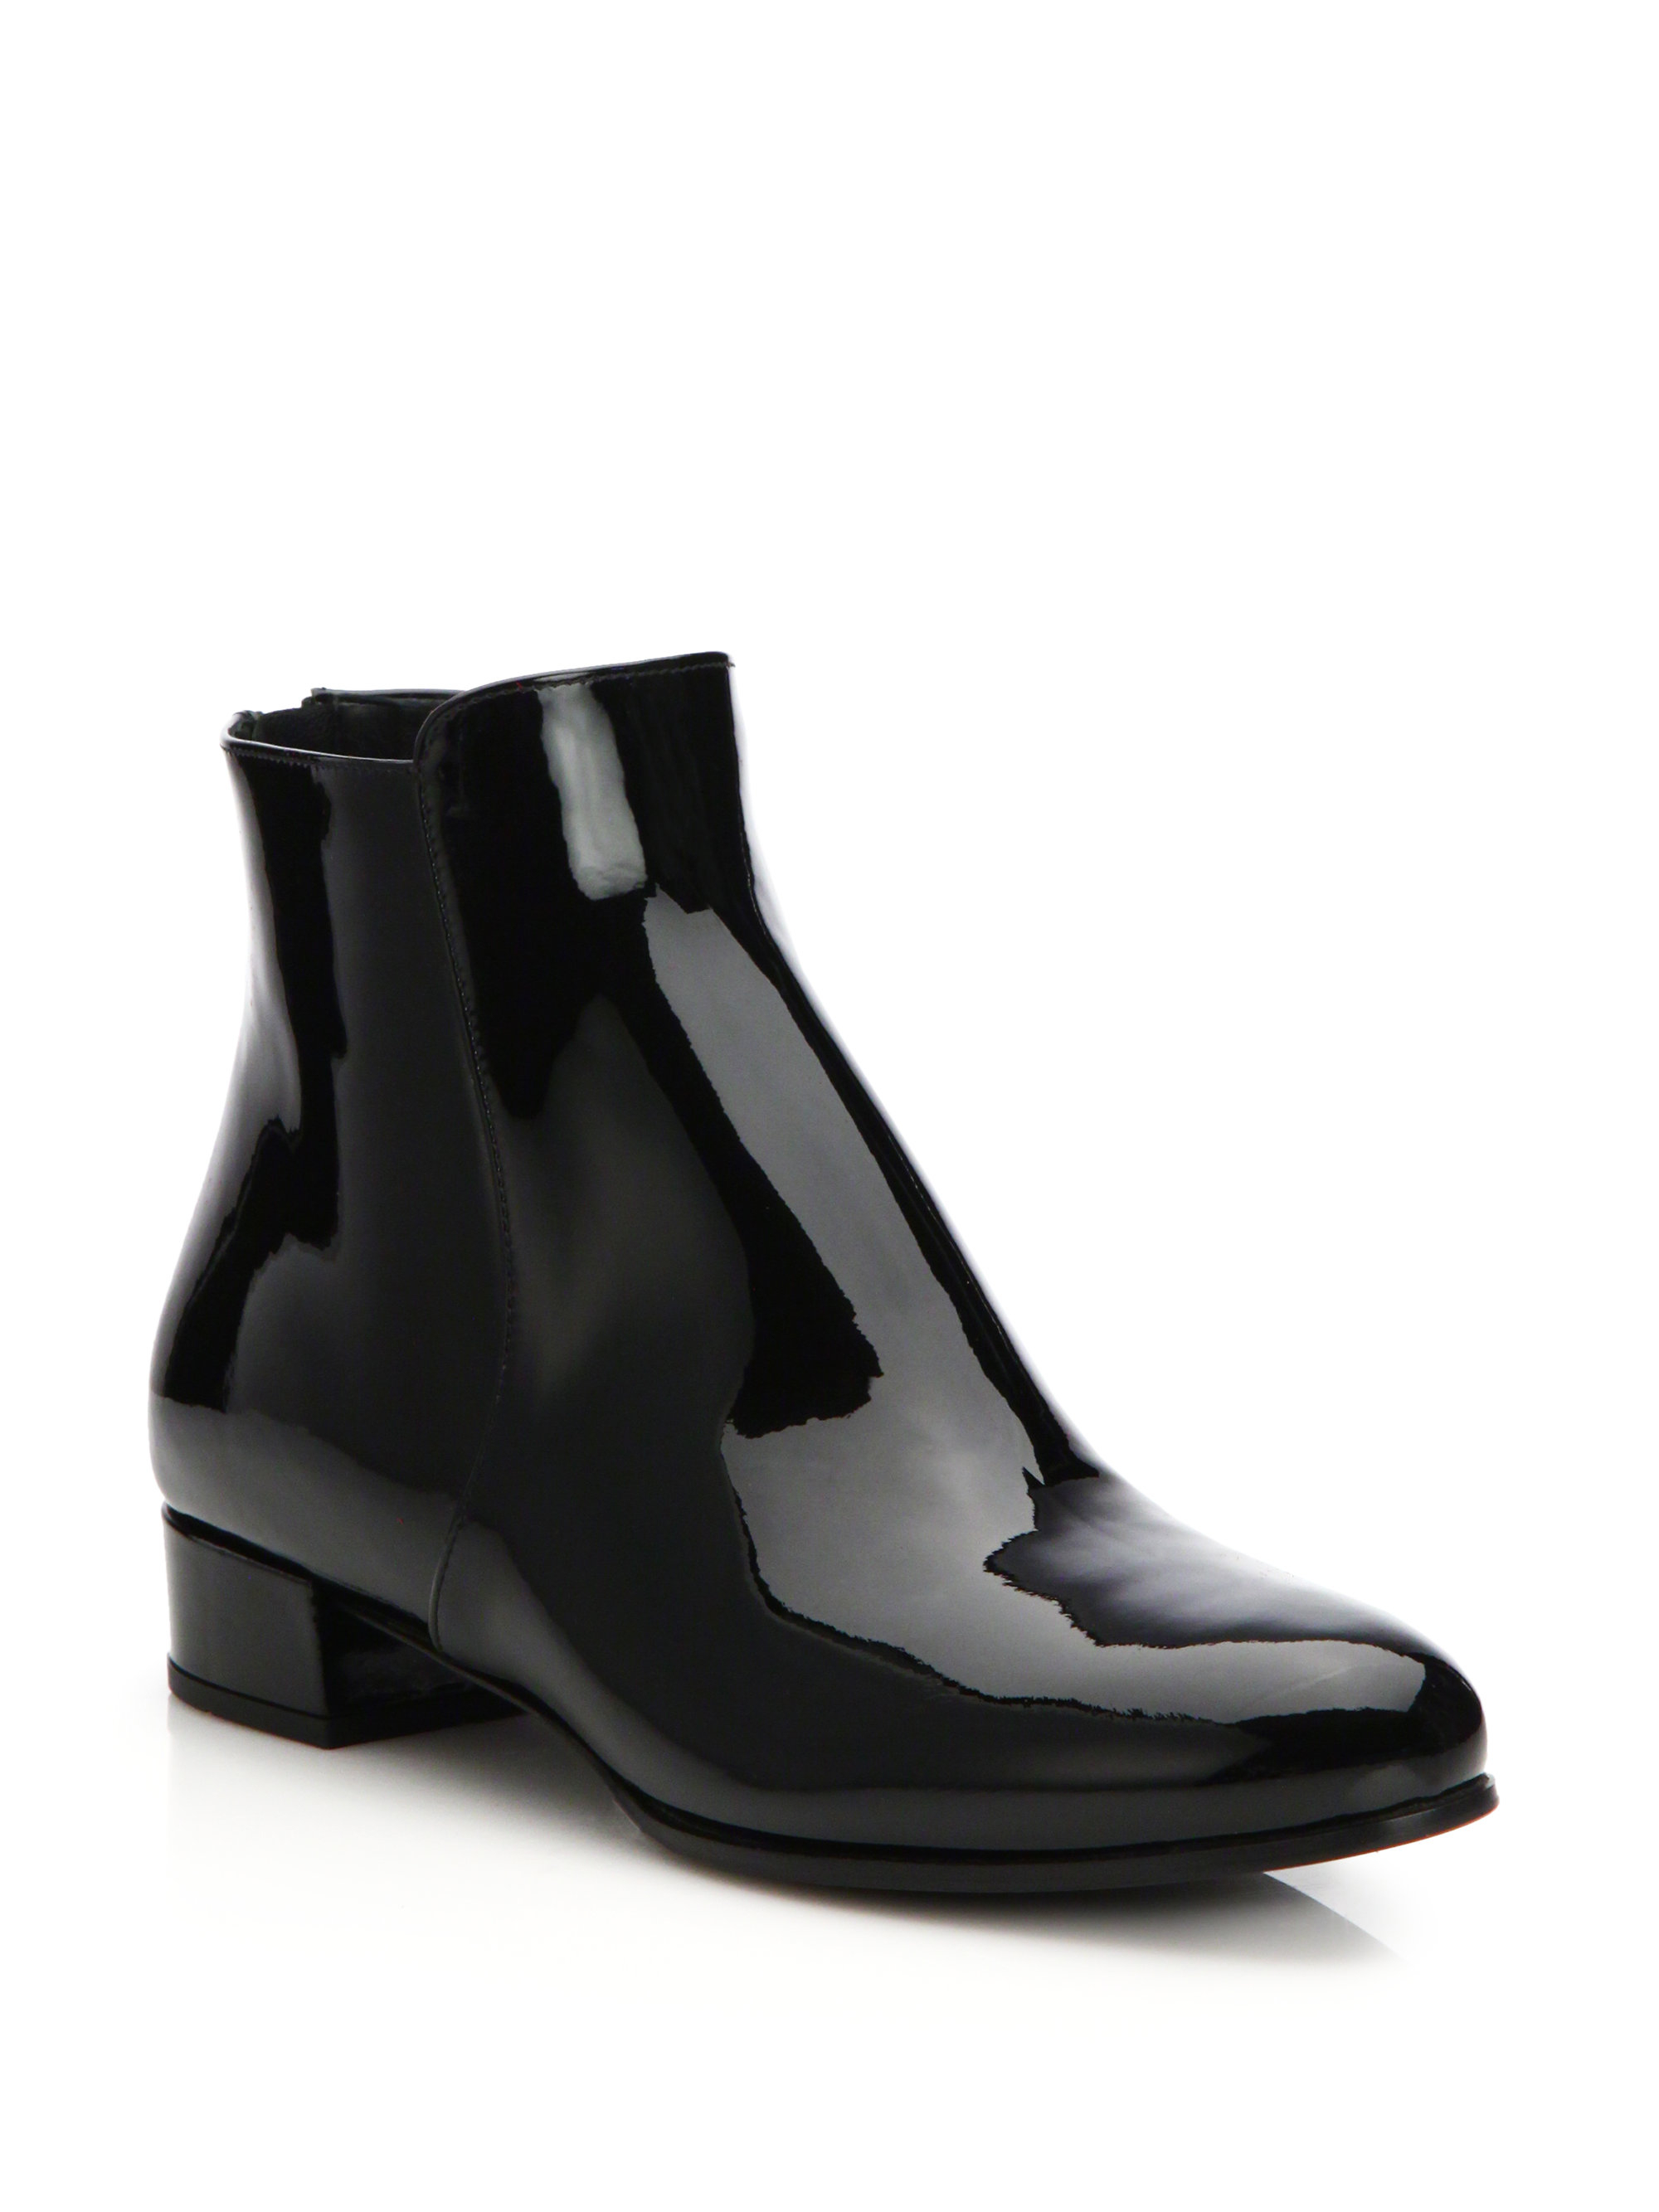 Minnetonka Women S Two Button Boot: Black Patent Leather Flat Ankle Boots